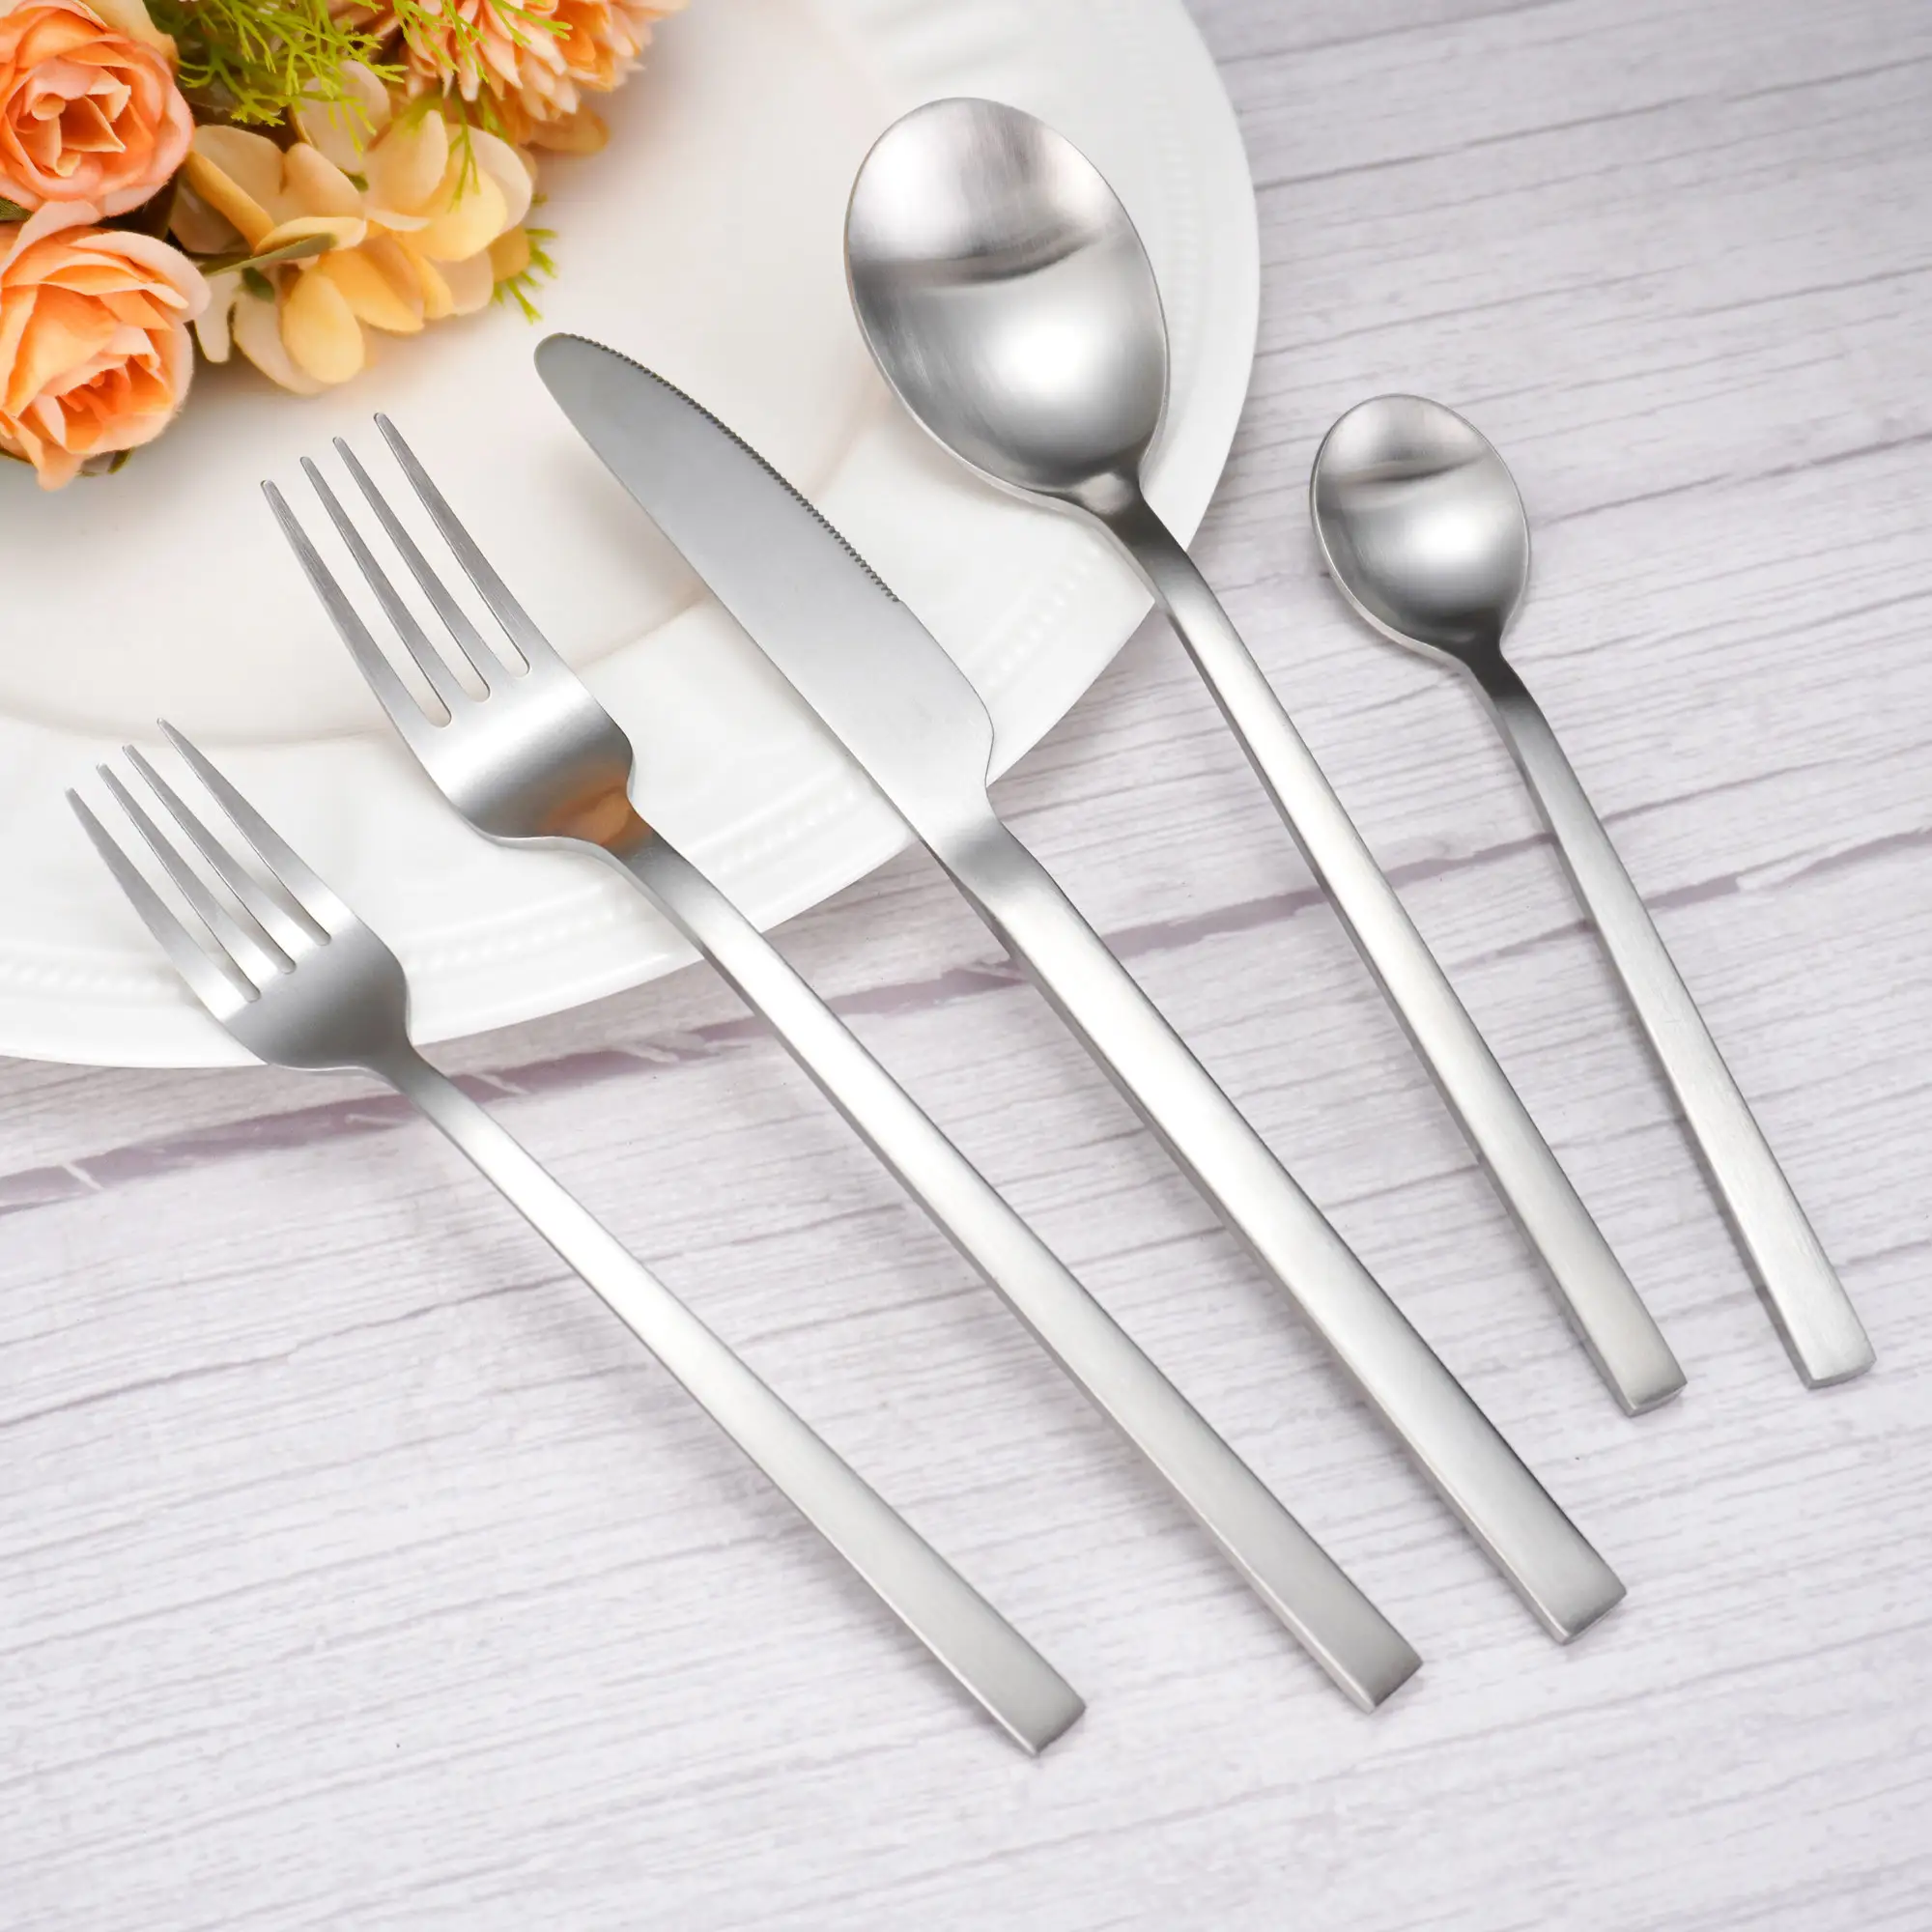 Wholesale Spoon Fork Knife Silver Cutlery Set Luxury High Quality Stainless Steel Flatware Set For Wedding